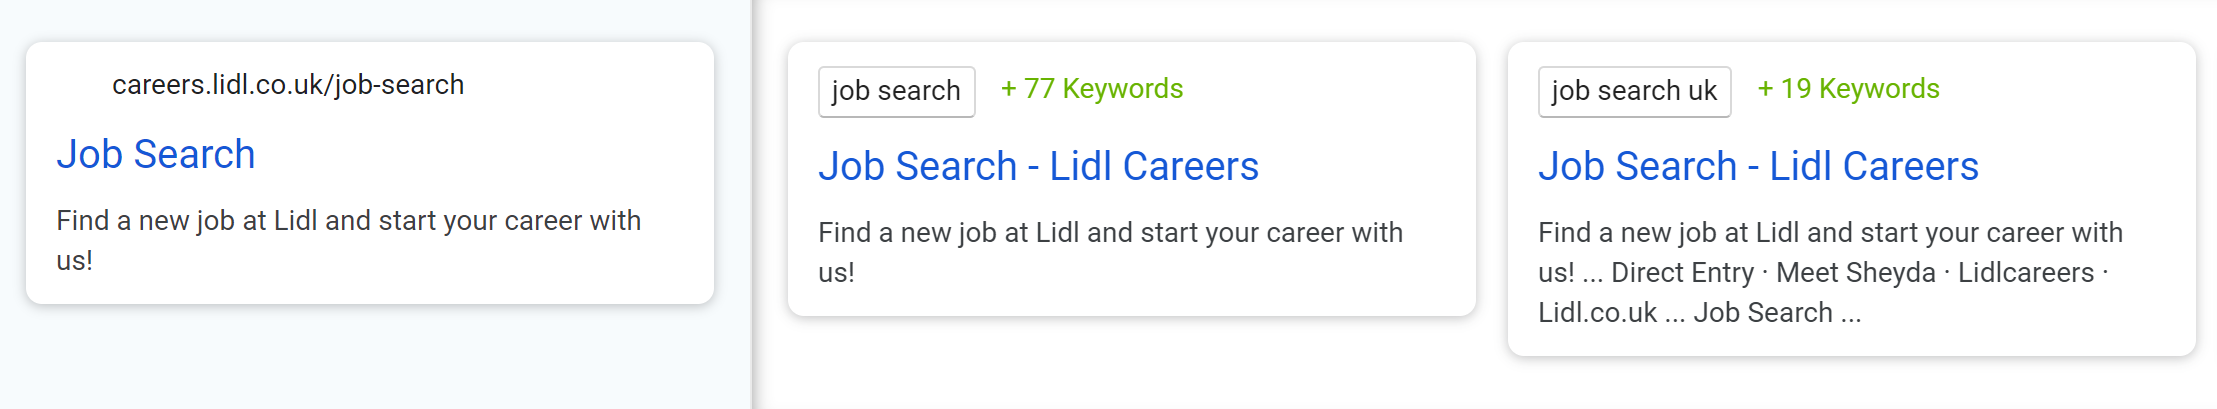 The domain lidl.co.uk only has the headline #Job Search and one sentence as the description. Google has changed the headline to #Job Search - Lidl Careers and has adapted the description to be longer.